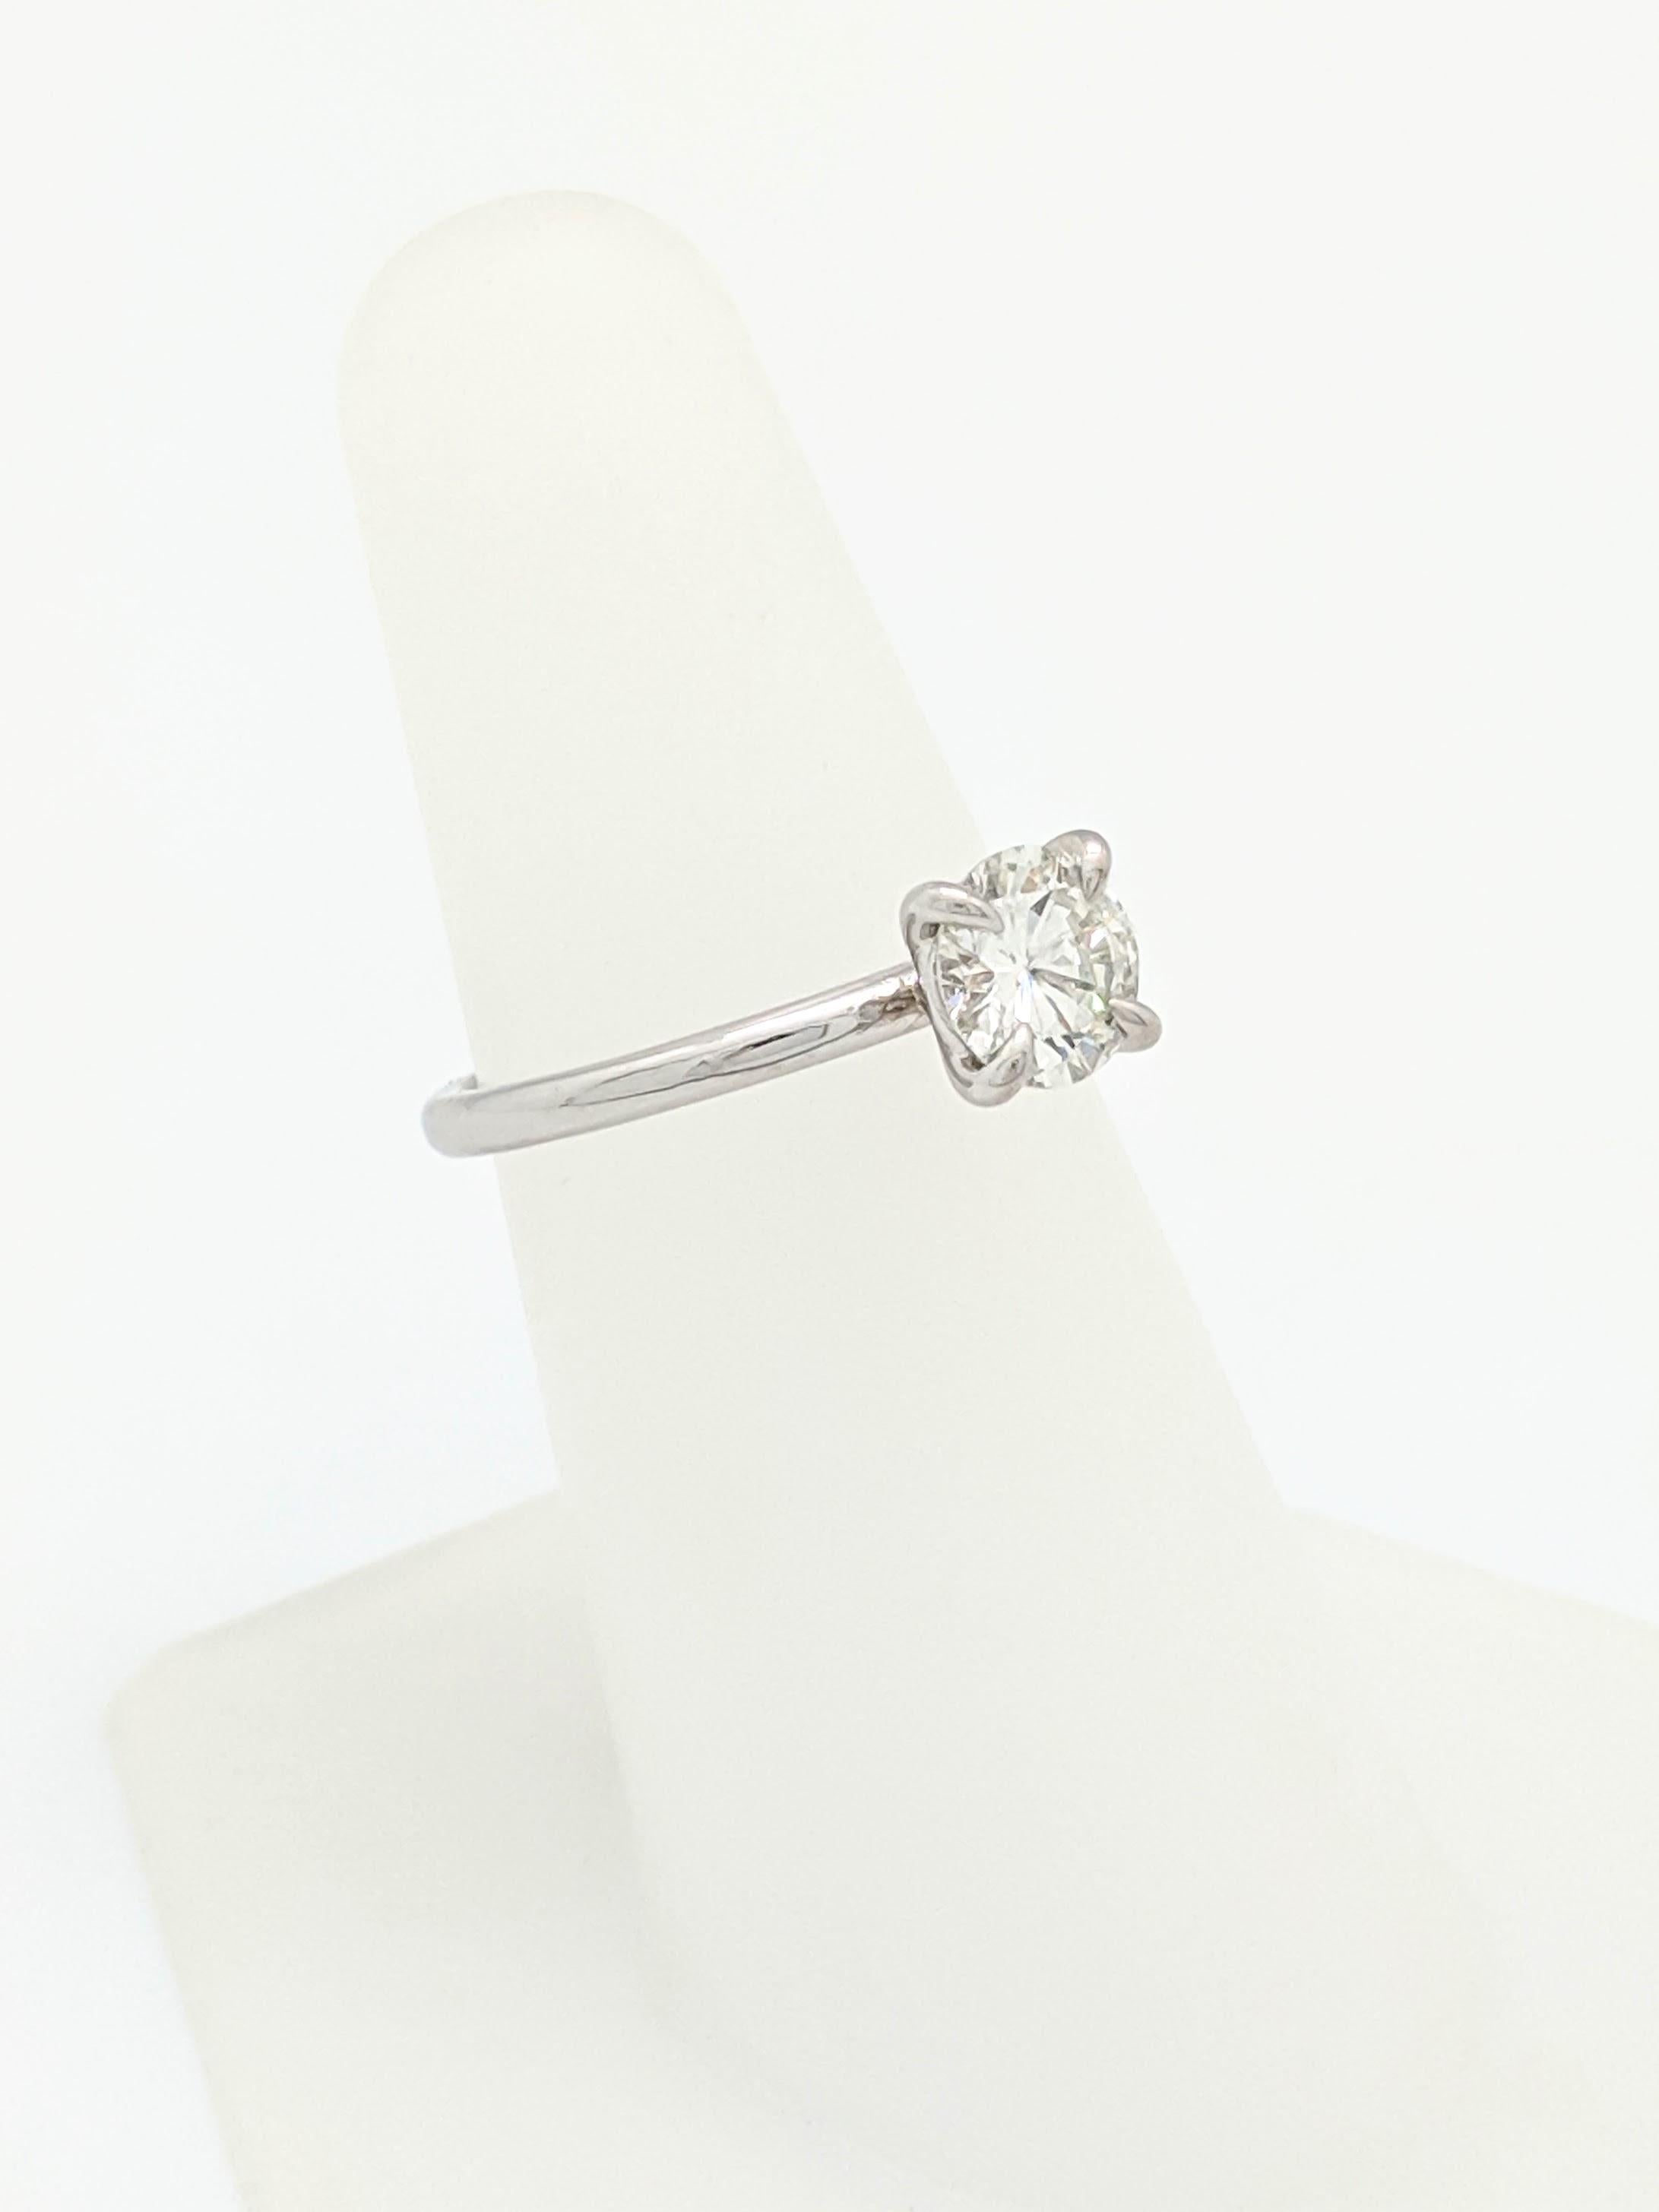 1.02 Carat Round Brilliant Cut Natural Diamond Ring GIA Certified SI1/J For Sale 4